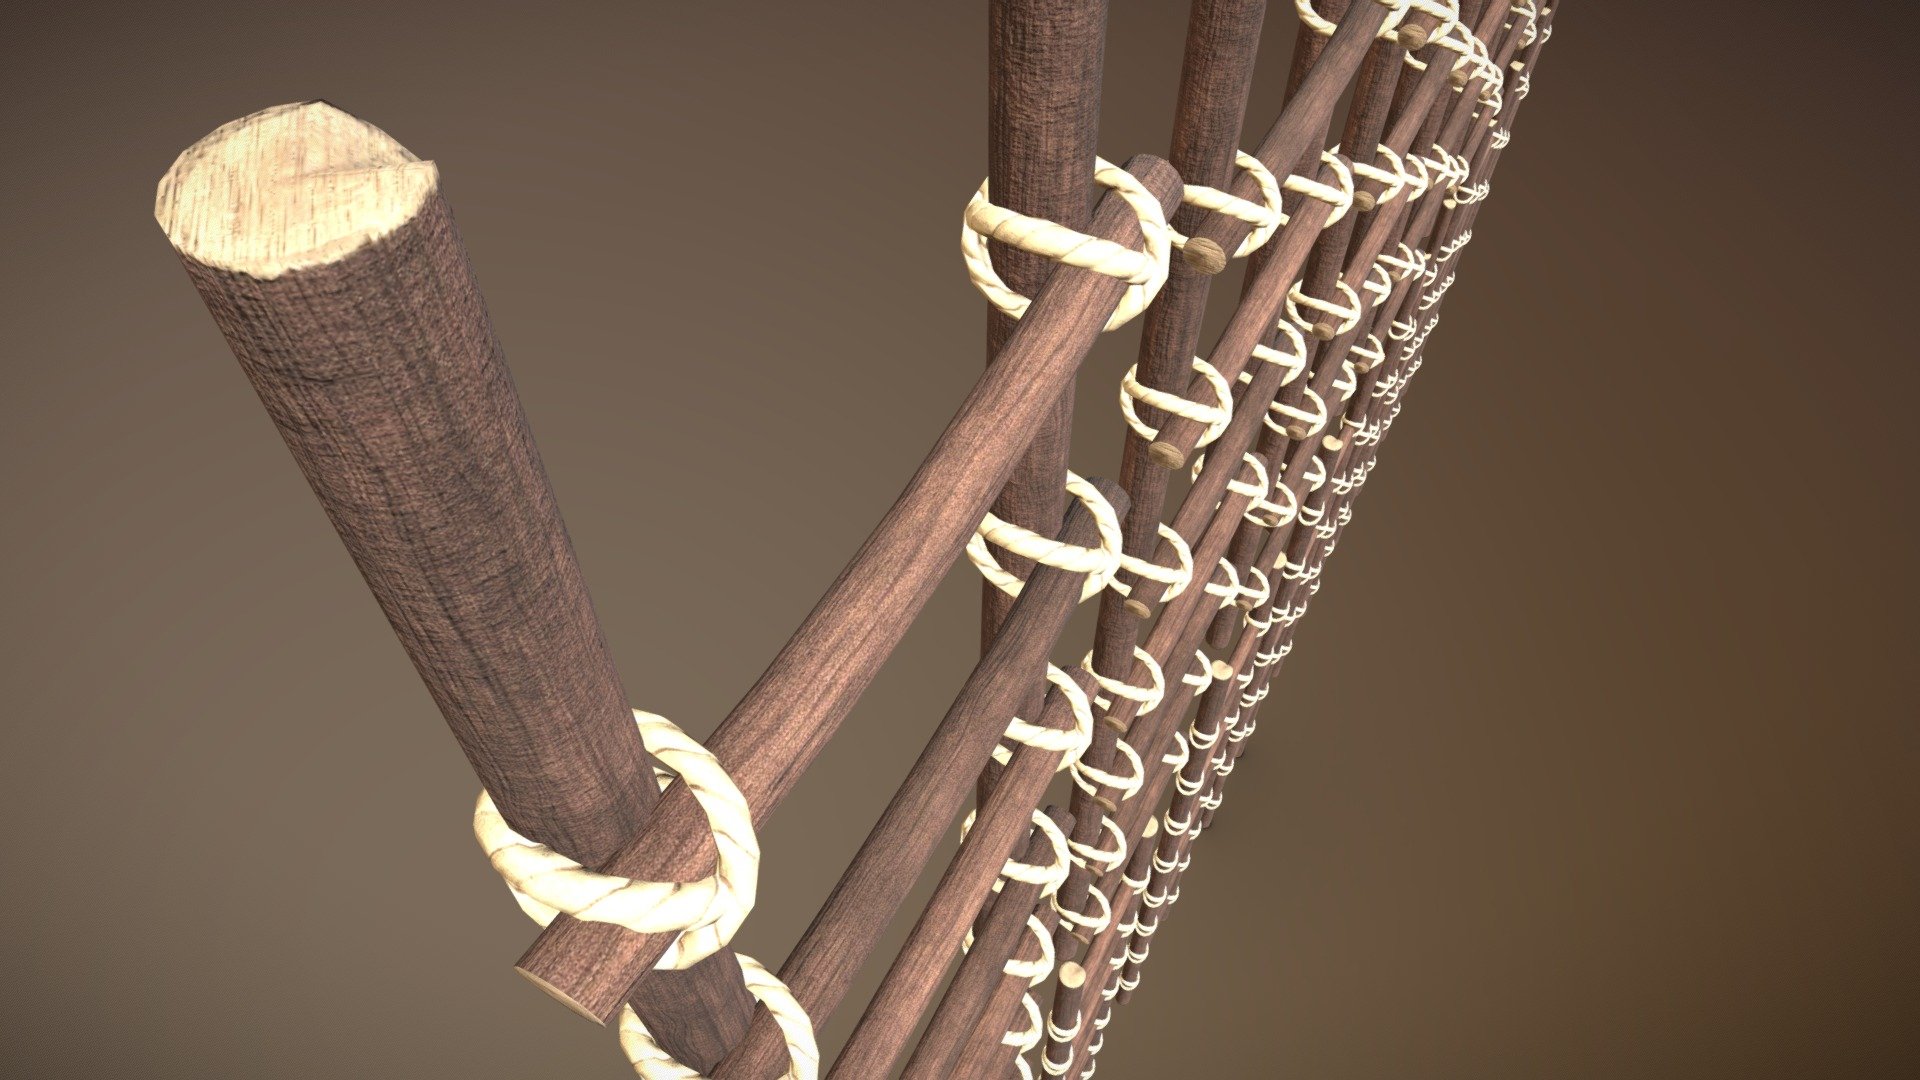 Wooden Ladder 1 Pack




2K PBR Textures [ColorMap, Metallic, Roughness, Ambient Occlusion, Normal]

1 material set for all ladders and 1 material set for all knots

UV Unwrapped
- Notes: Dual Knots and Var1 ladder have overlapping UVs.

FBX [Scene + Individual Exports at origin 0, 0, 0]

Blend File Included [Scene + Individual Exports at origin 0, 0, 0]

All files have textures embedded

Models Polycount Range: 192 - 7094 Tris

Scene with all models Polycount:   118196 Tris and 61074 Verts

Naming Conventions: SM_ / M_ / T_

Note: The ladders do not come separated in parts, it is one mesh per ladder - Wooden Ladder 1 Pack - Buy Royalty Free 3D model by Jesus Fernandez Garcia (@jamyzgenius) 3d model